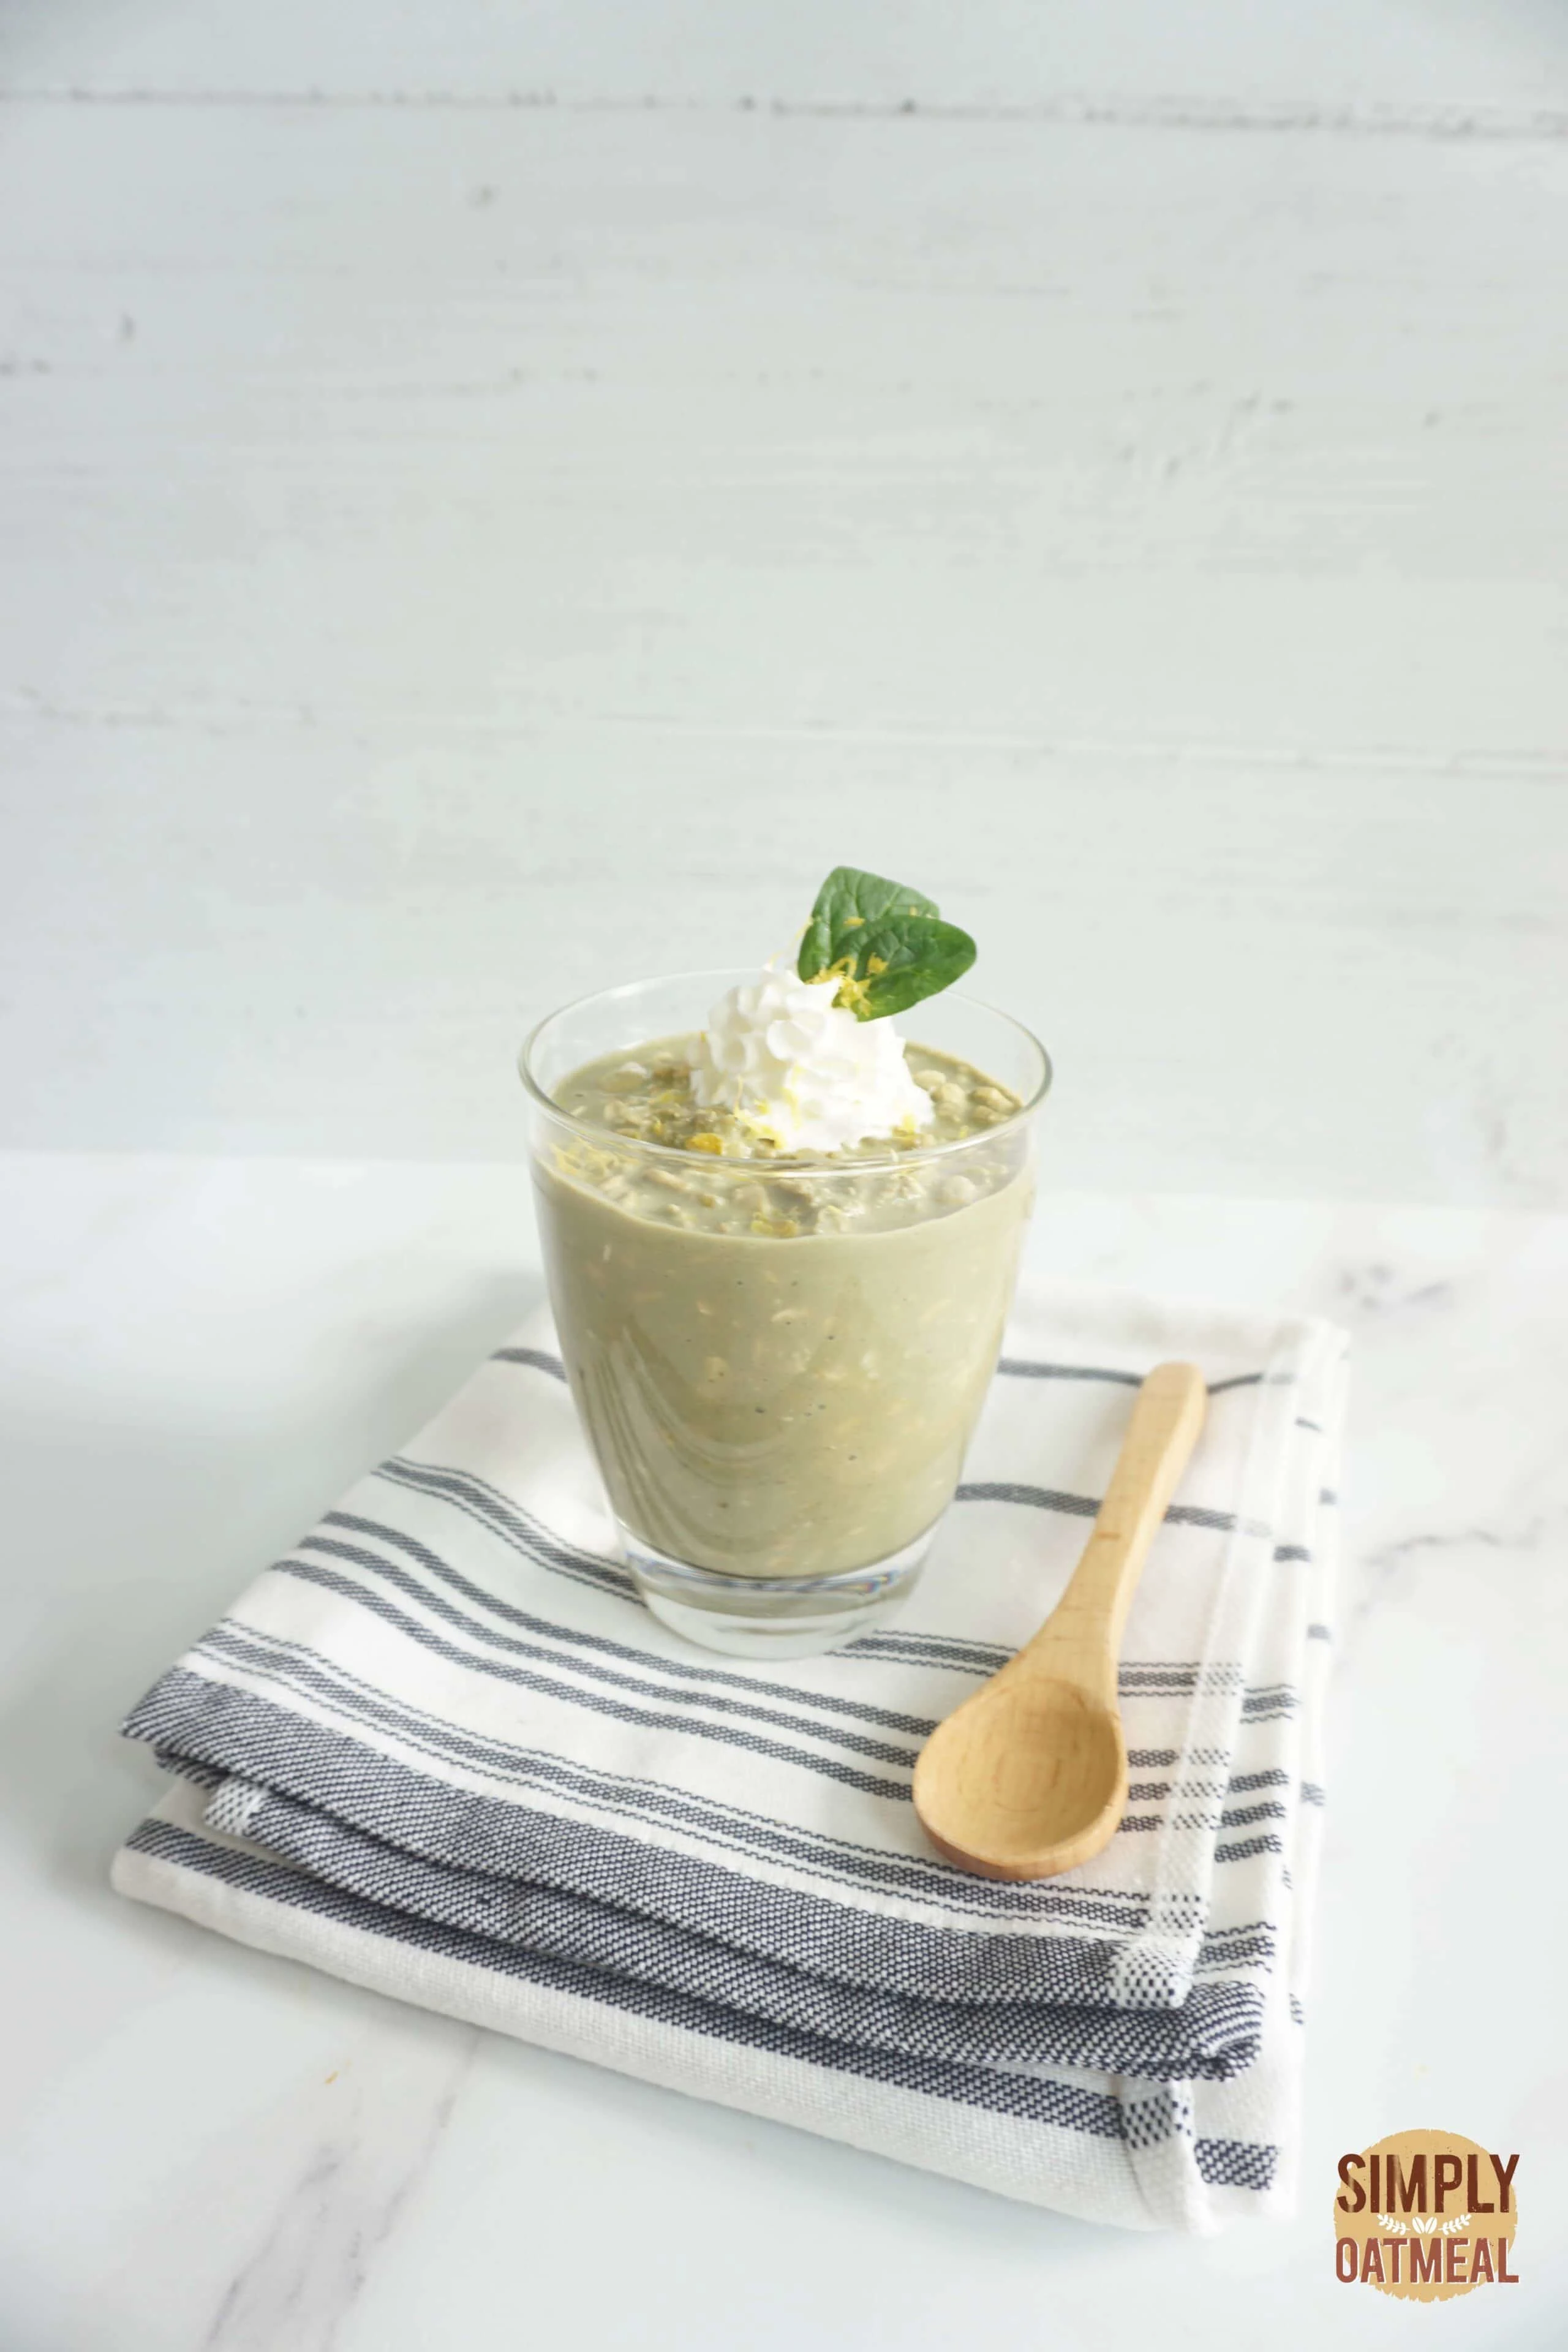 Green tea lemonade overnight oats served in a glass cup with sliced lemon and macha powder